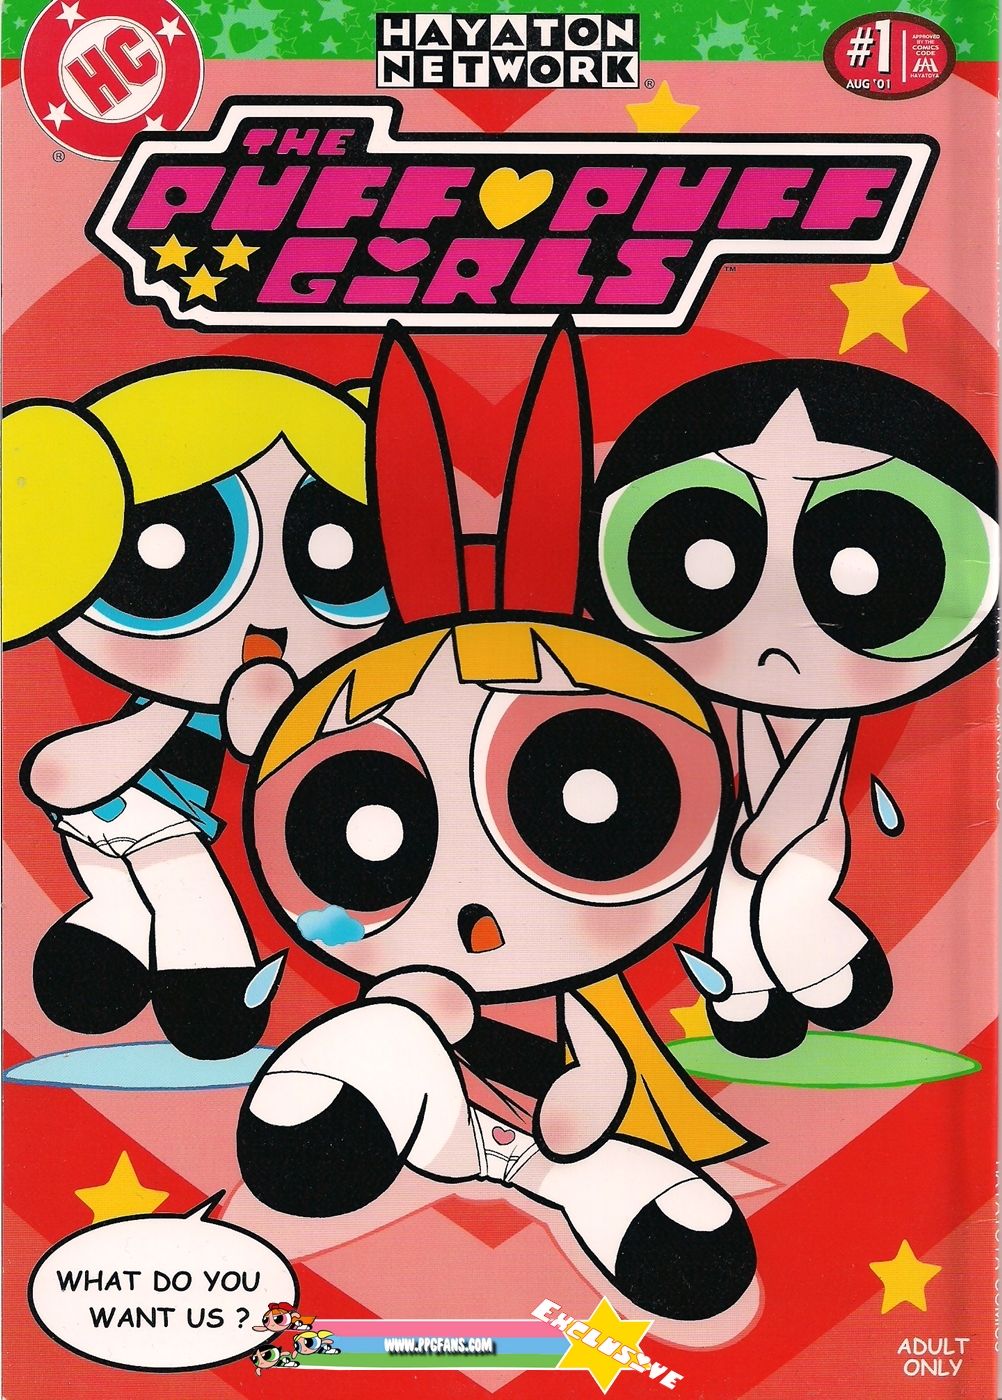 THE PUFF PUFF GIRLS - Page 1 - Comic Porn XXX